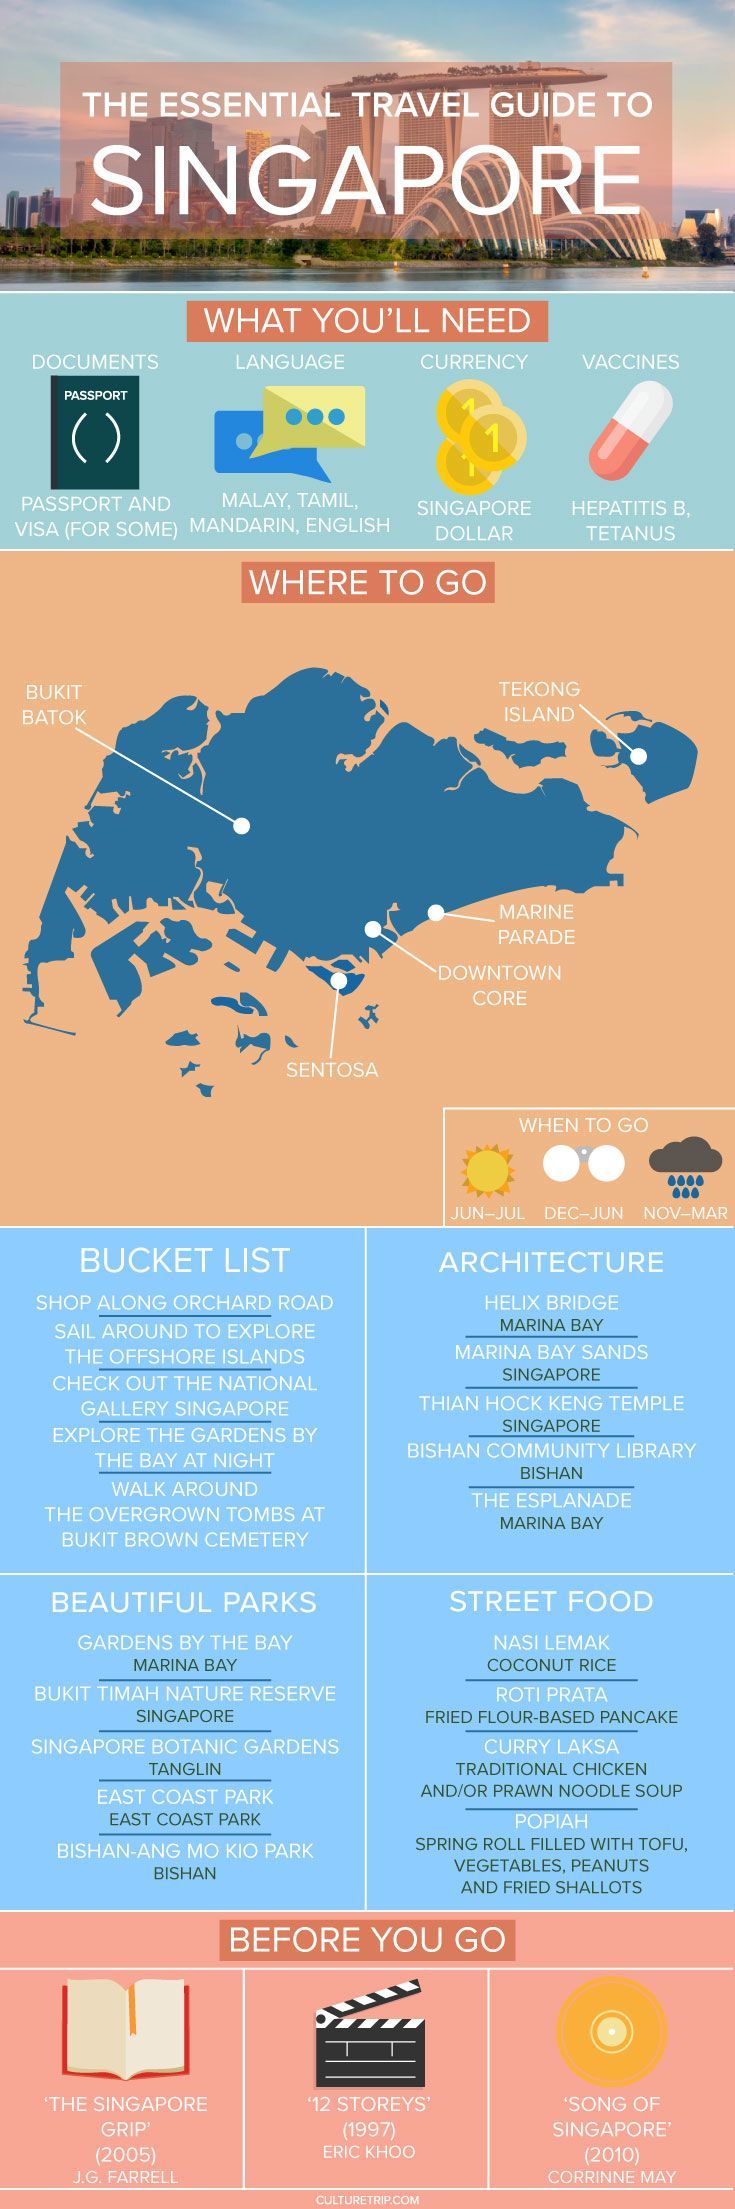 Your Essential Travel Guide to Singapore (Infographic)